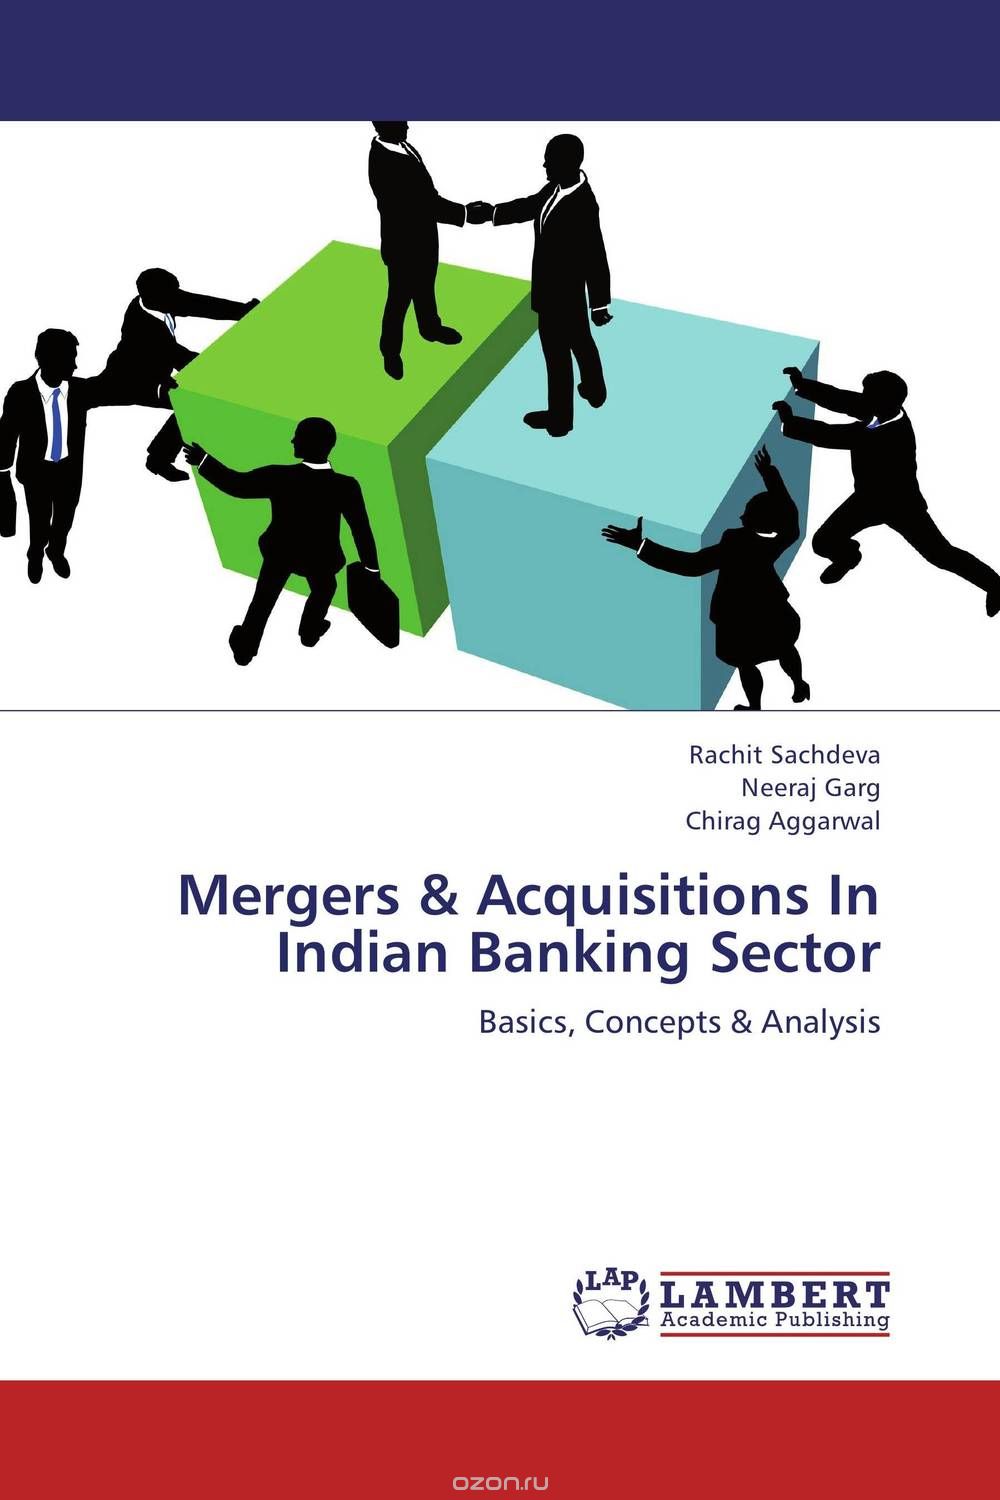 Скачать книгу "Mergers & Acquisitions In Indian Banking Sector"